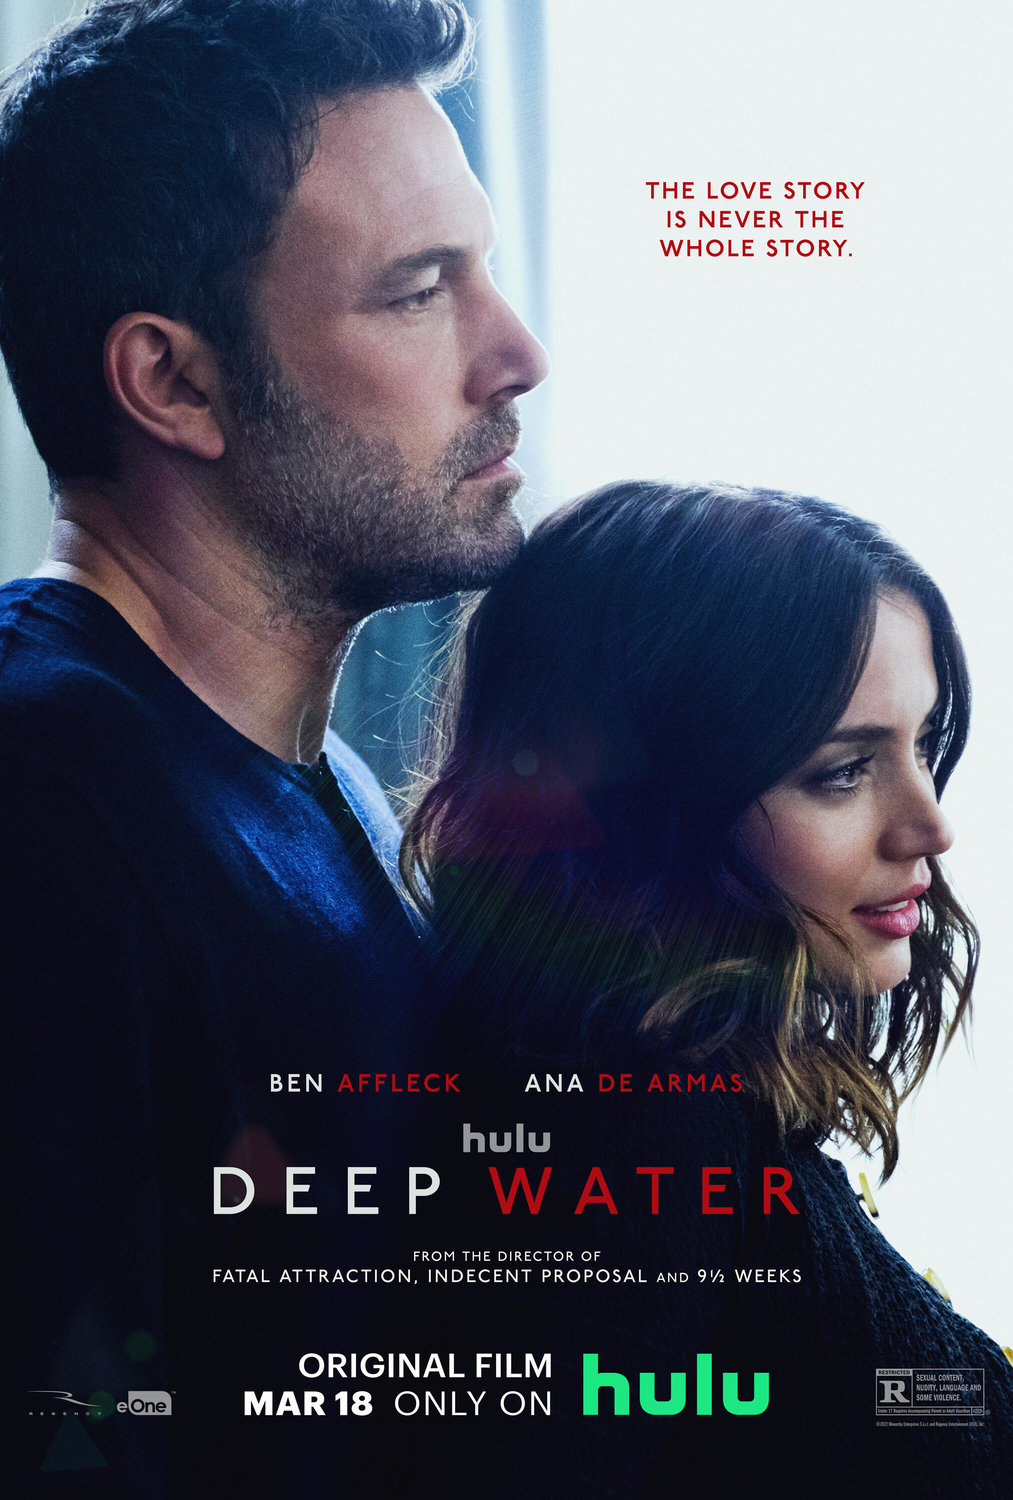 Ben Affleck and Ana de Armas star in the erotic thriller 'Deep Water' (2022), which is director Adrian Lyne's first feature film in 20 years..